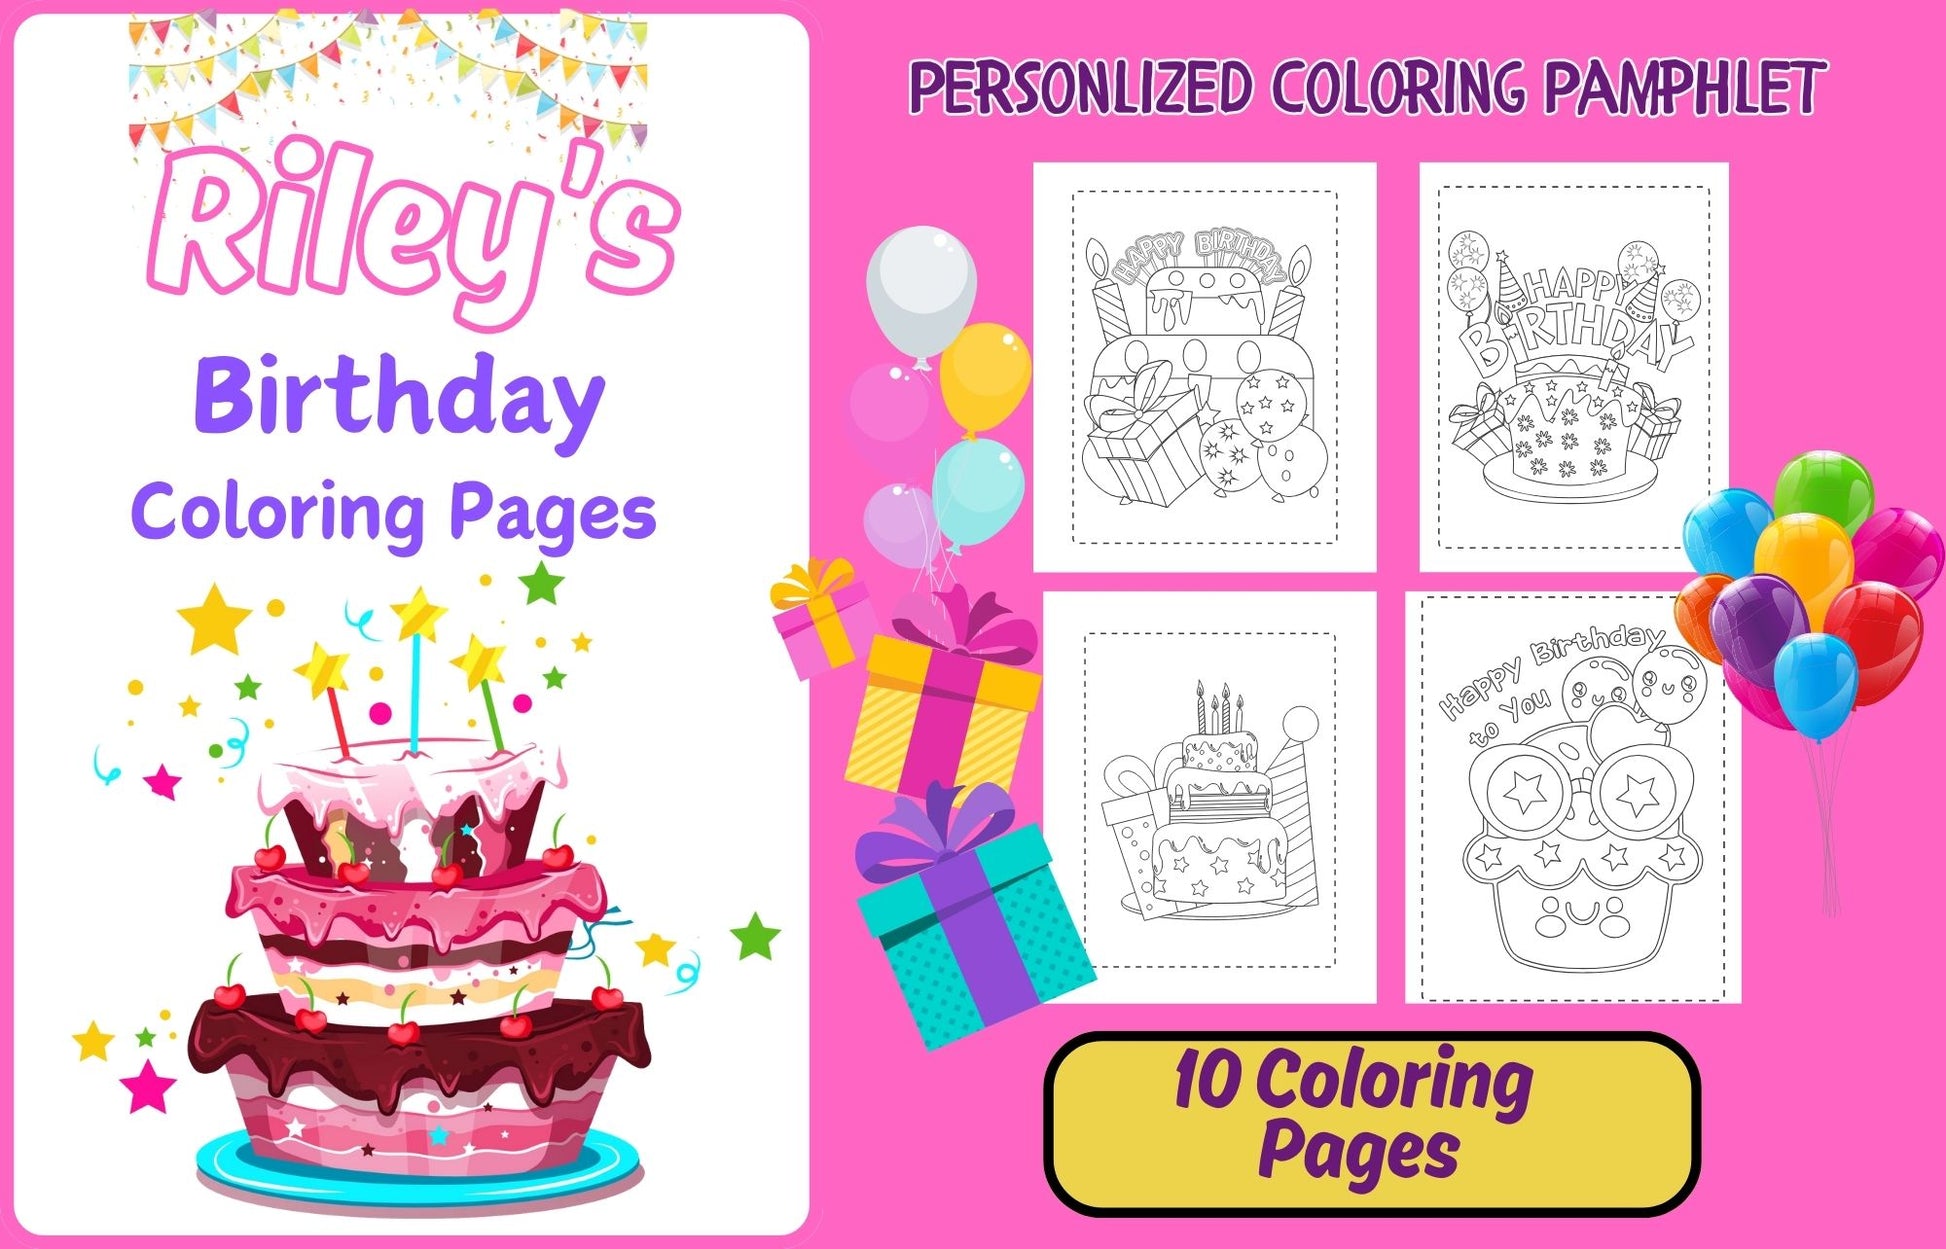 Personalized Birthday Coloring Pamphlet 